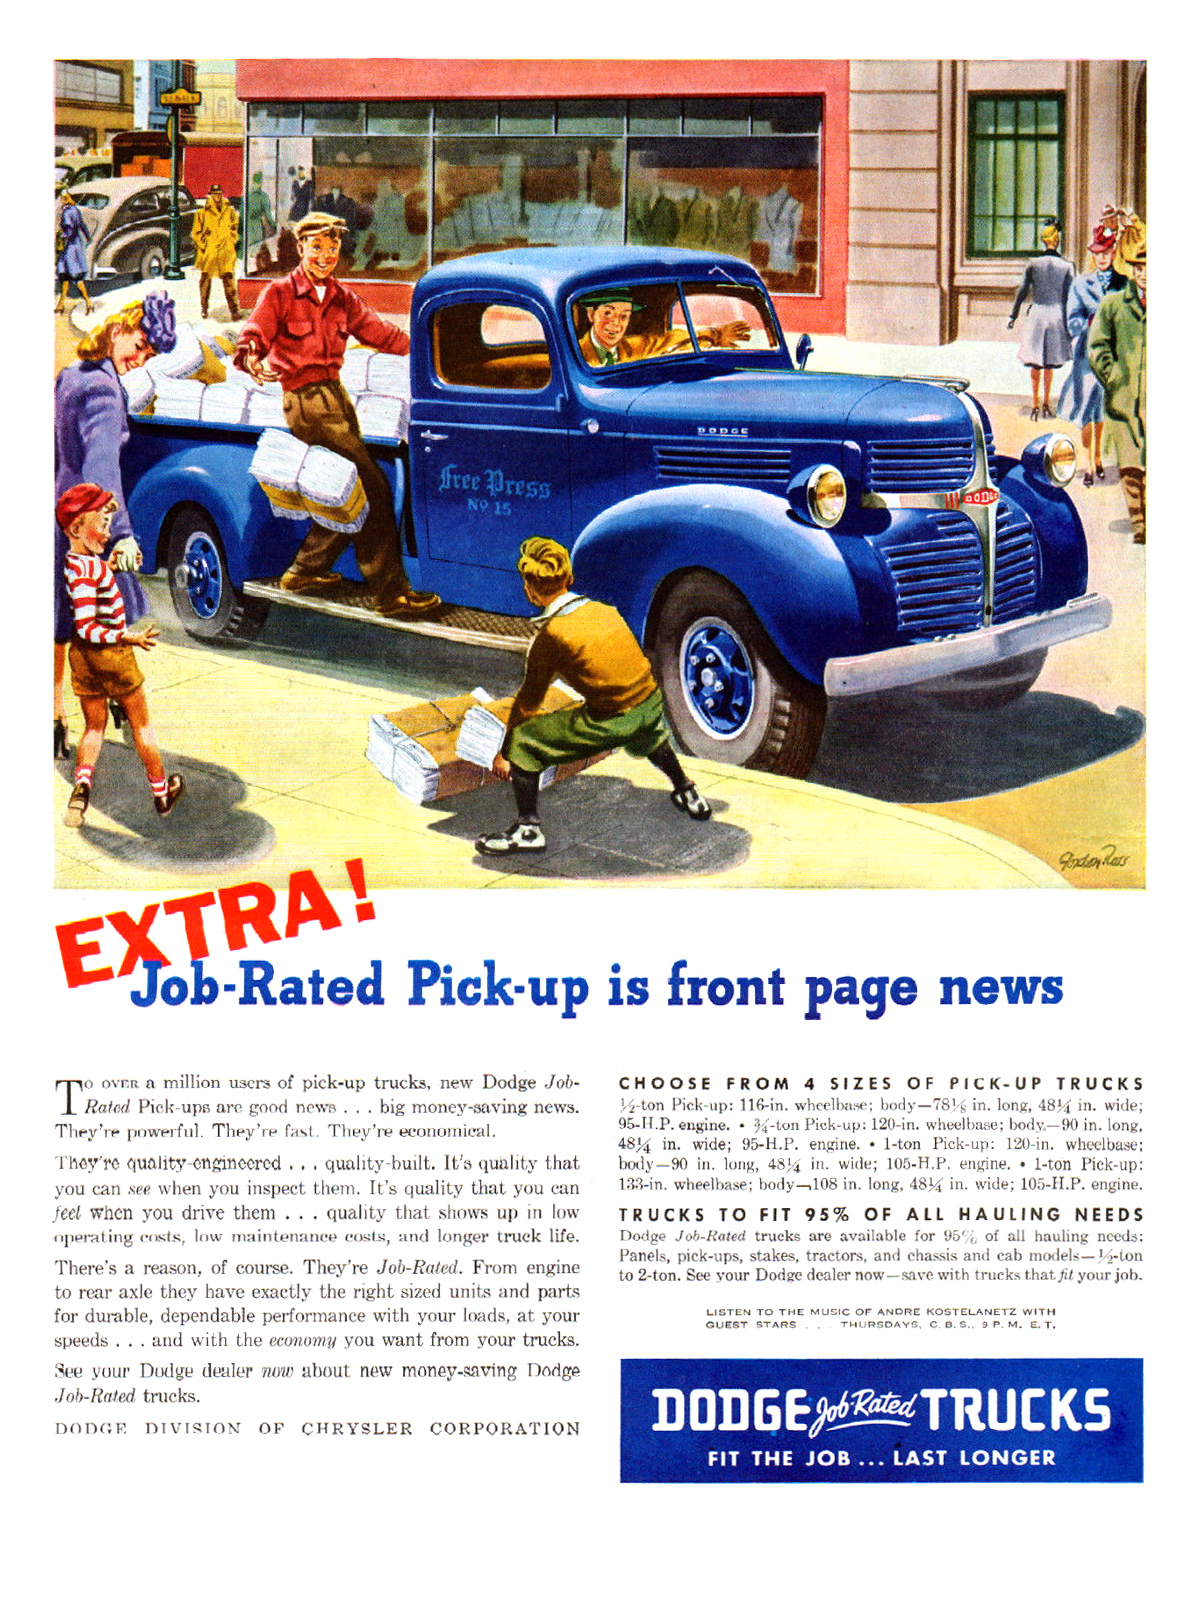 Dodge Trucks Ad (March, 1946): Extra! Job-Rated Pick-up is front page news - Illustrated by Gordon Ross